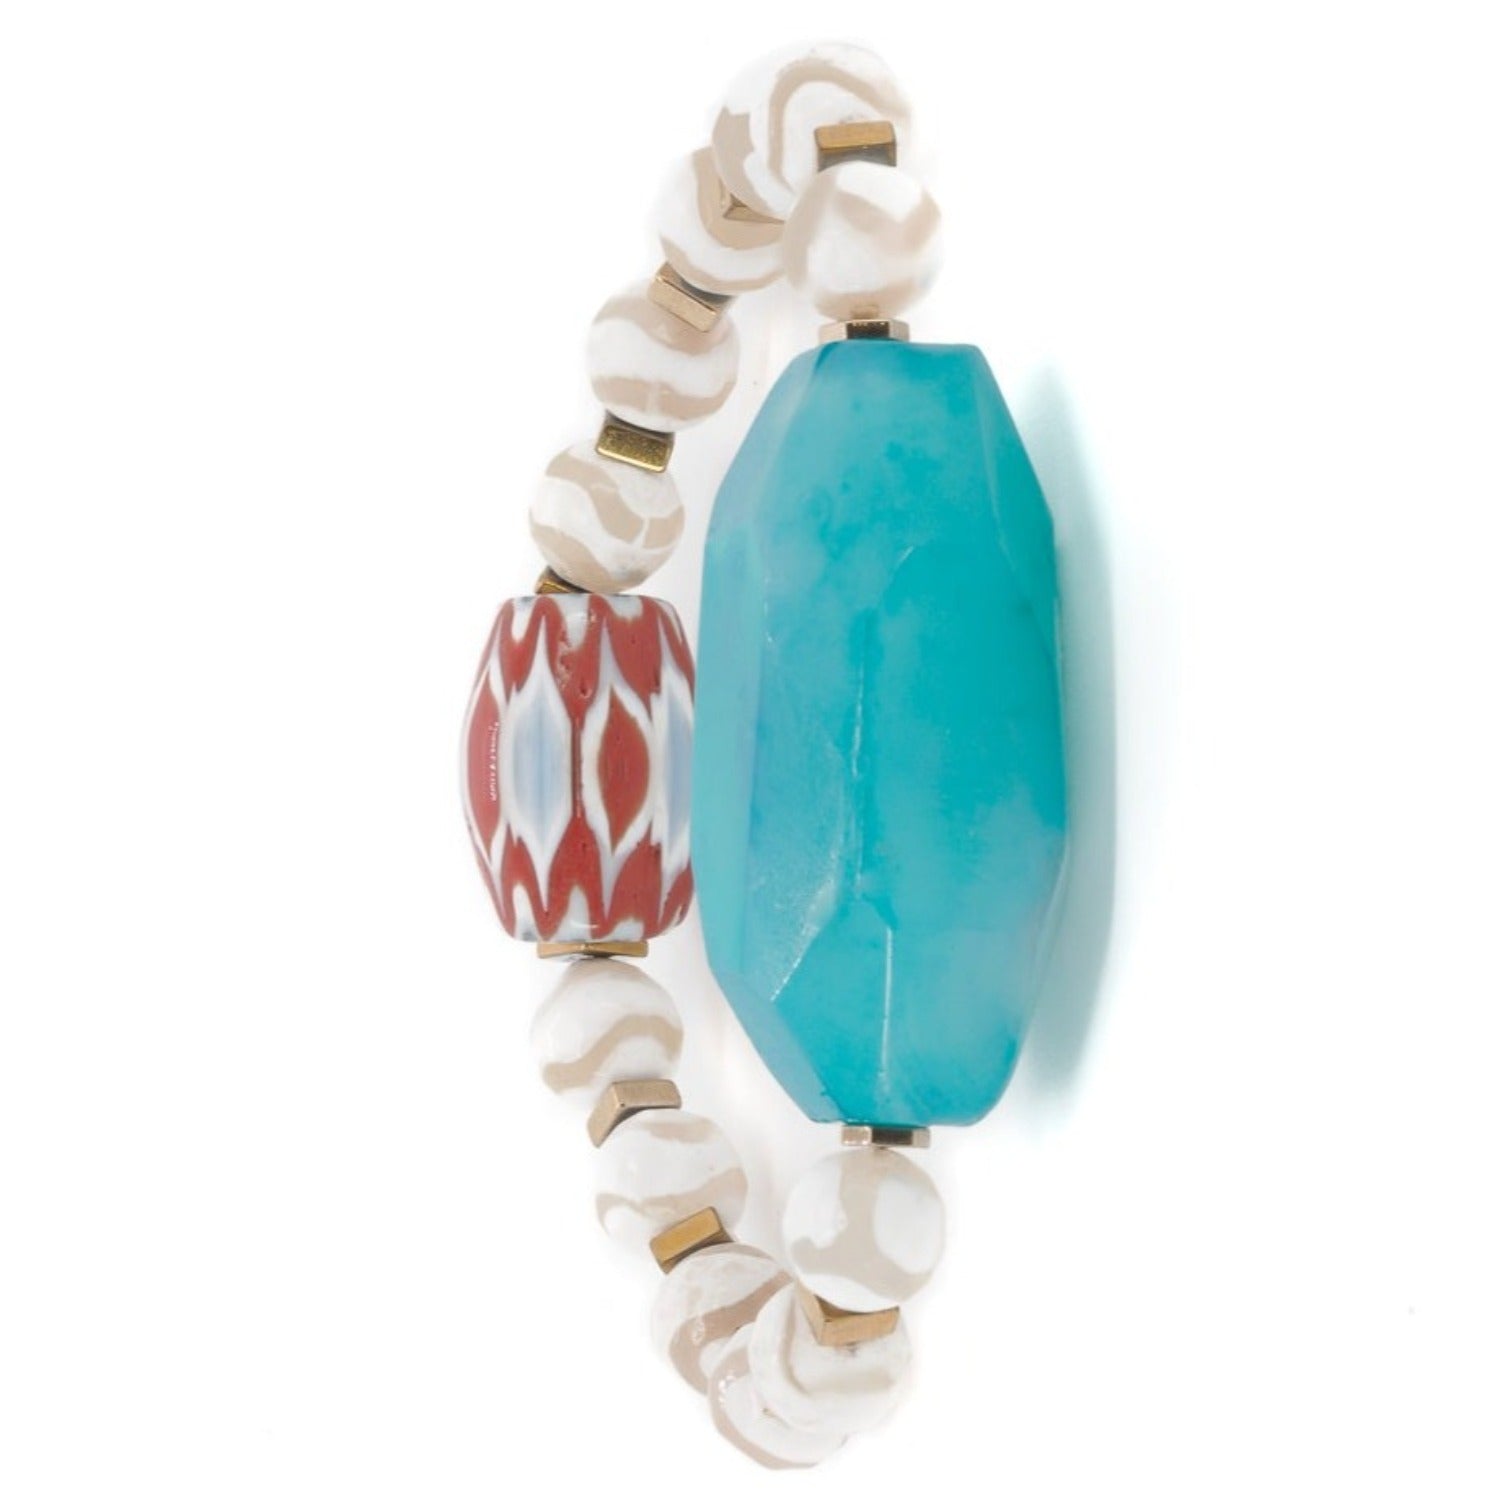 The Nepal Blue Agate Bracelet is a meaningful and stylish accessory, handcrafted to create a truly special piece.